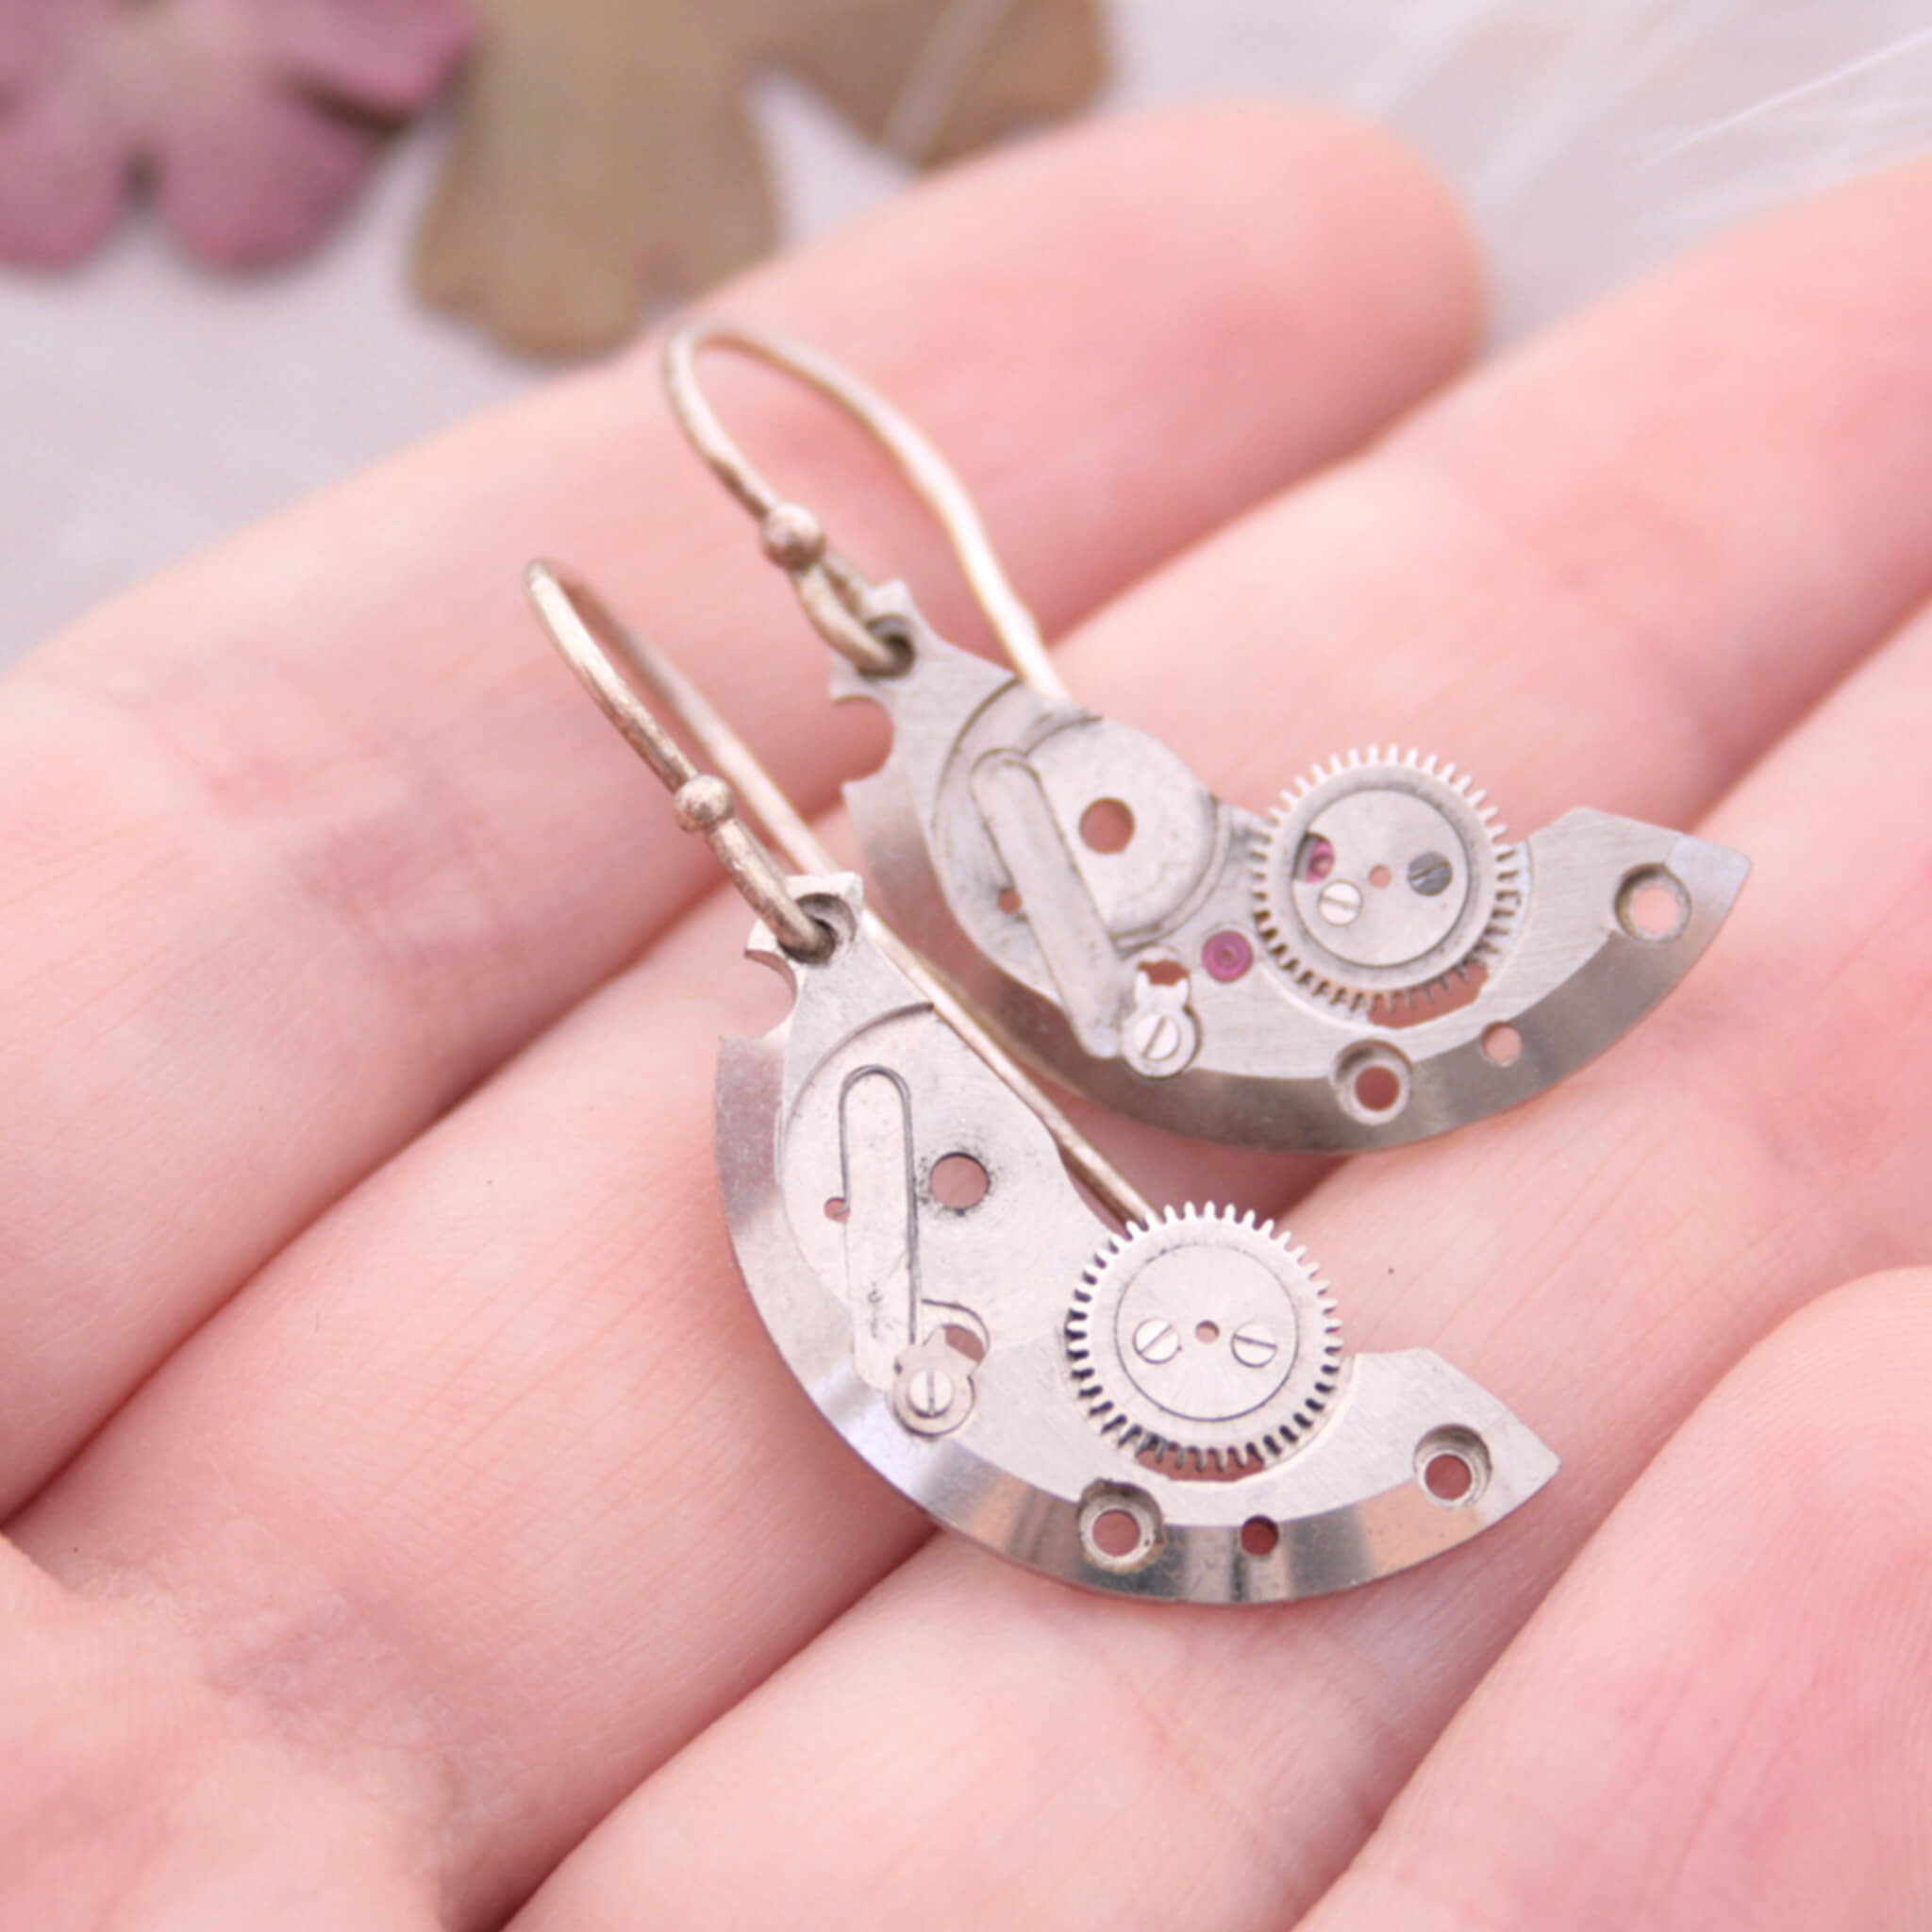 watch parts turned into dangling earrings lying on a hand